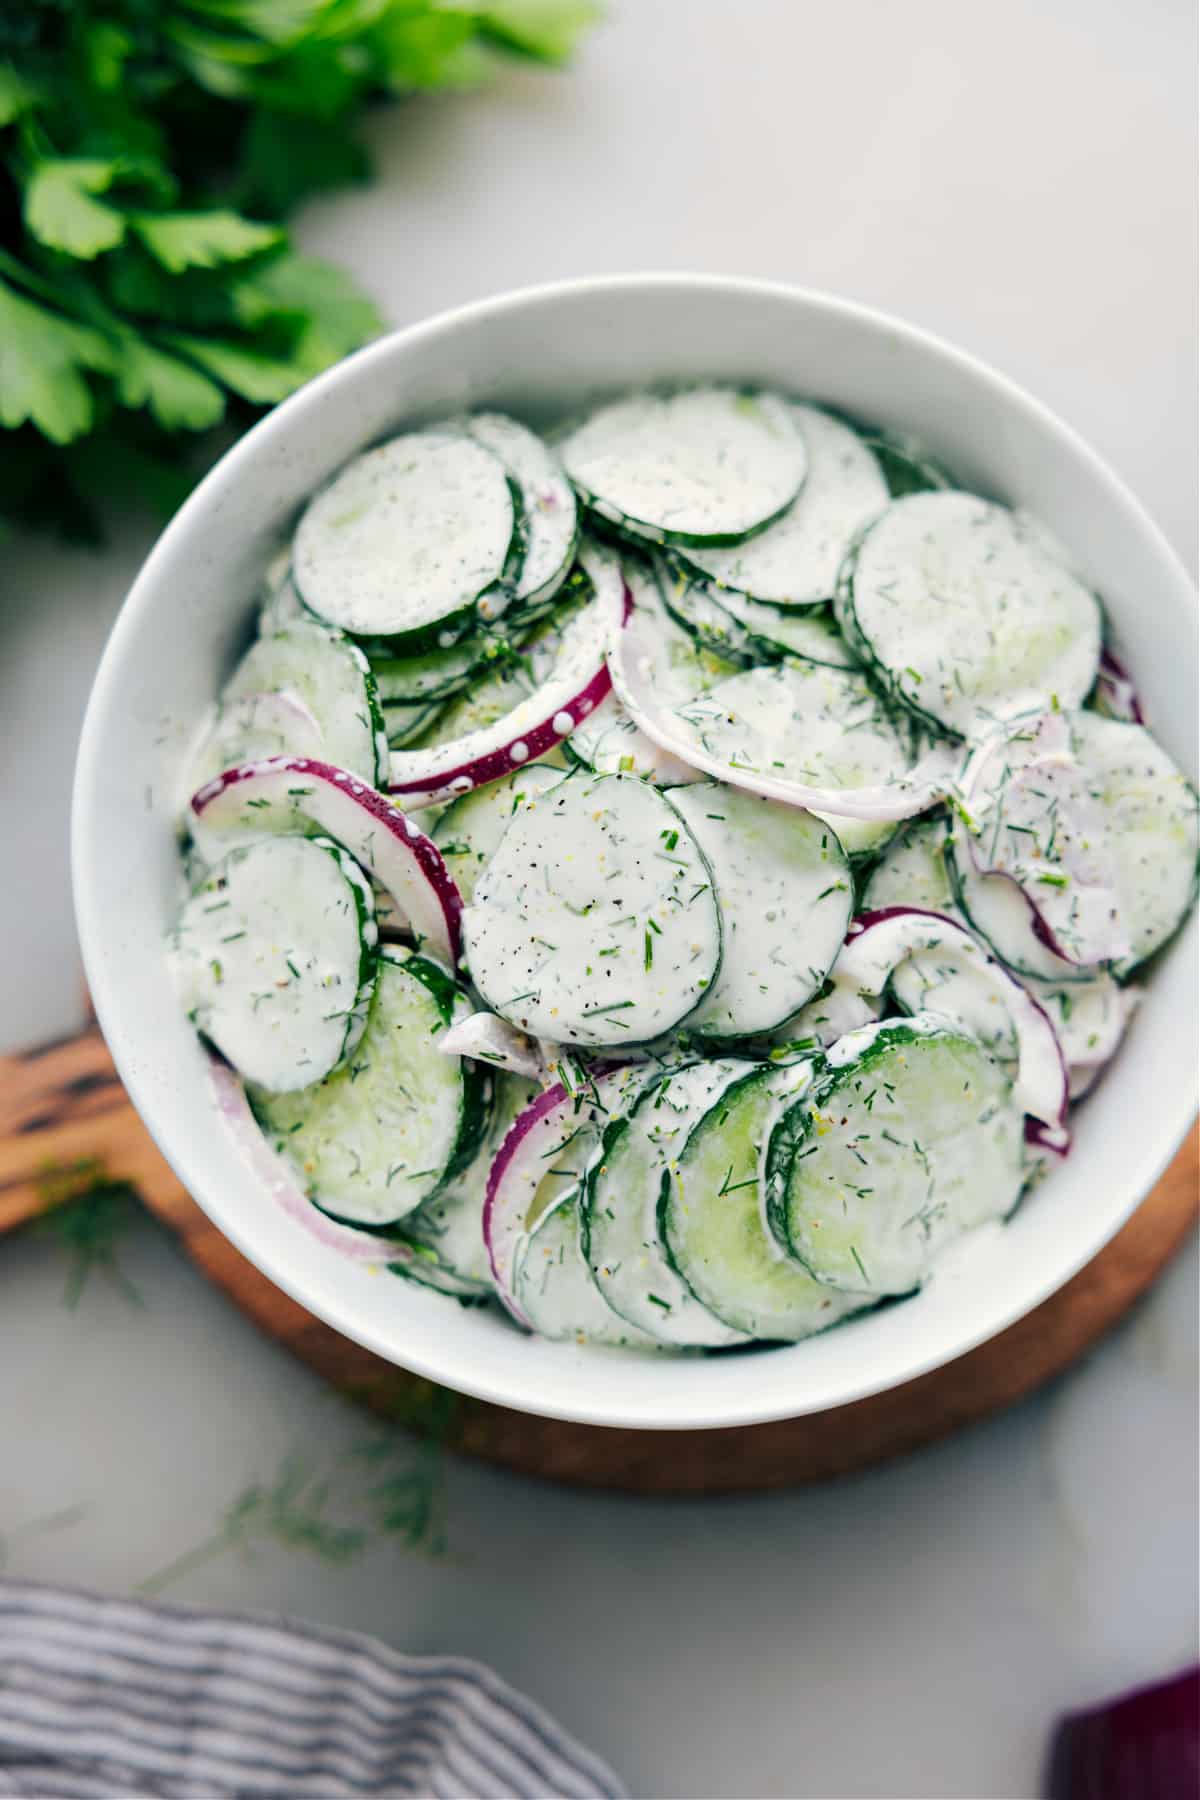 Creamy Cucumber Salad assembled and ready to be enjoyed.